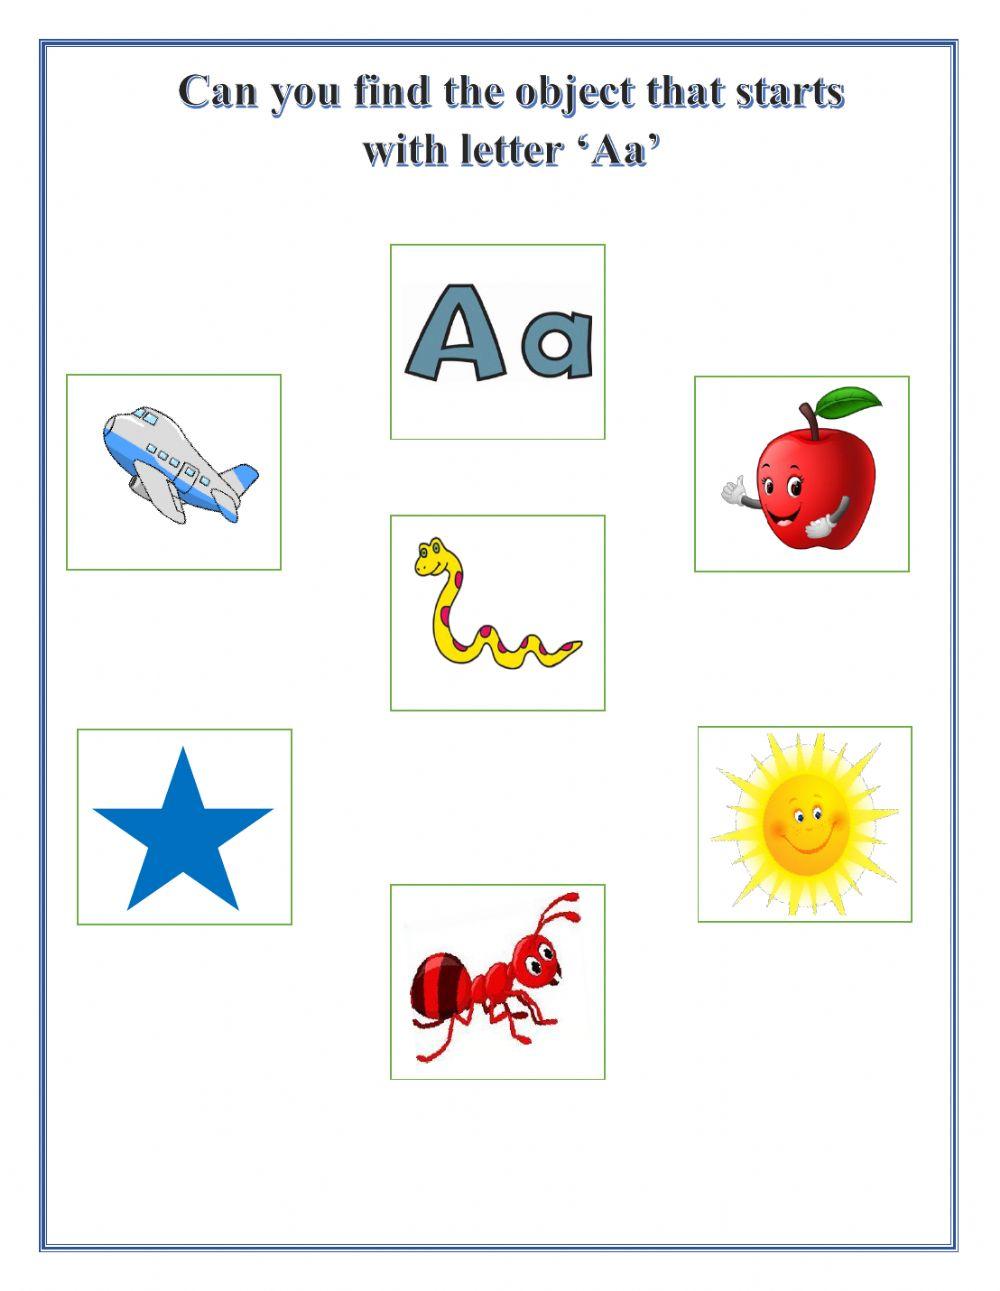 Find the object that starts with letter ‘Aa’